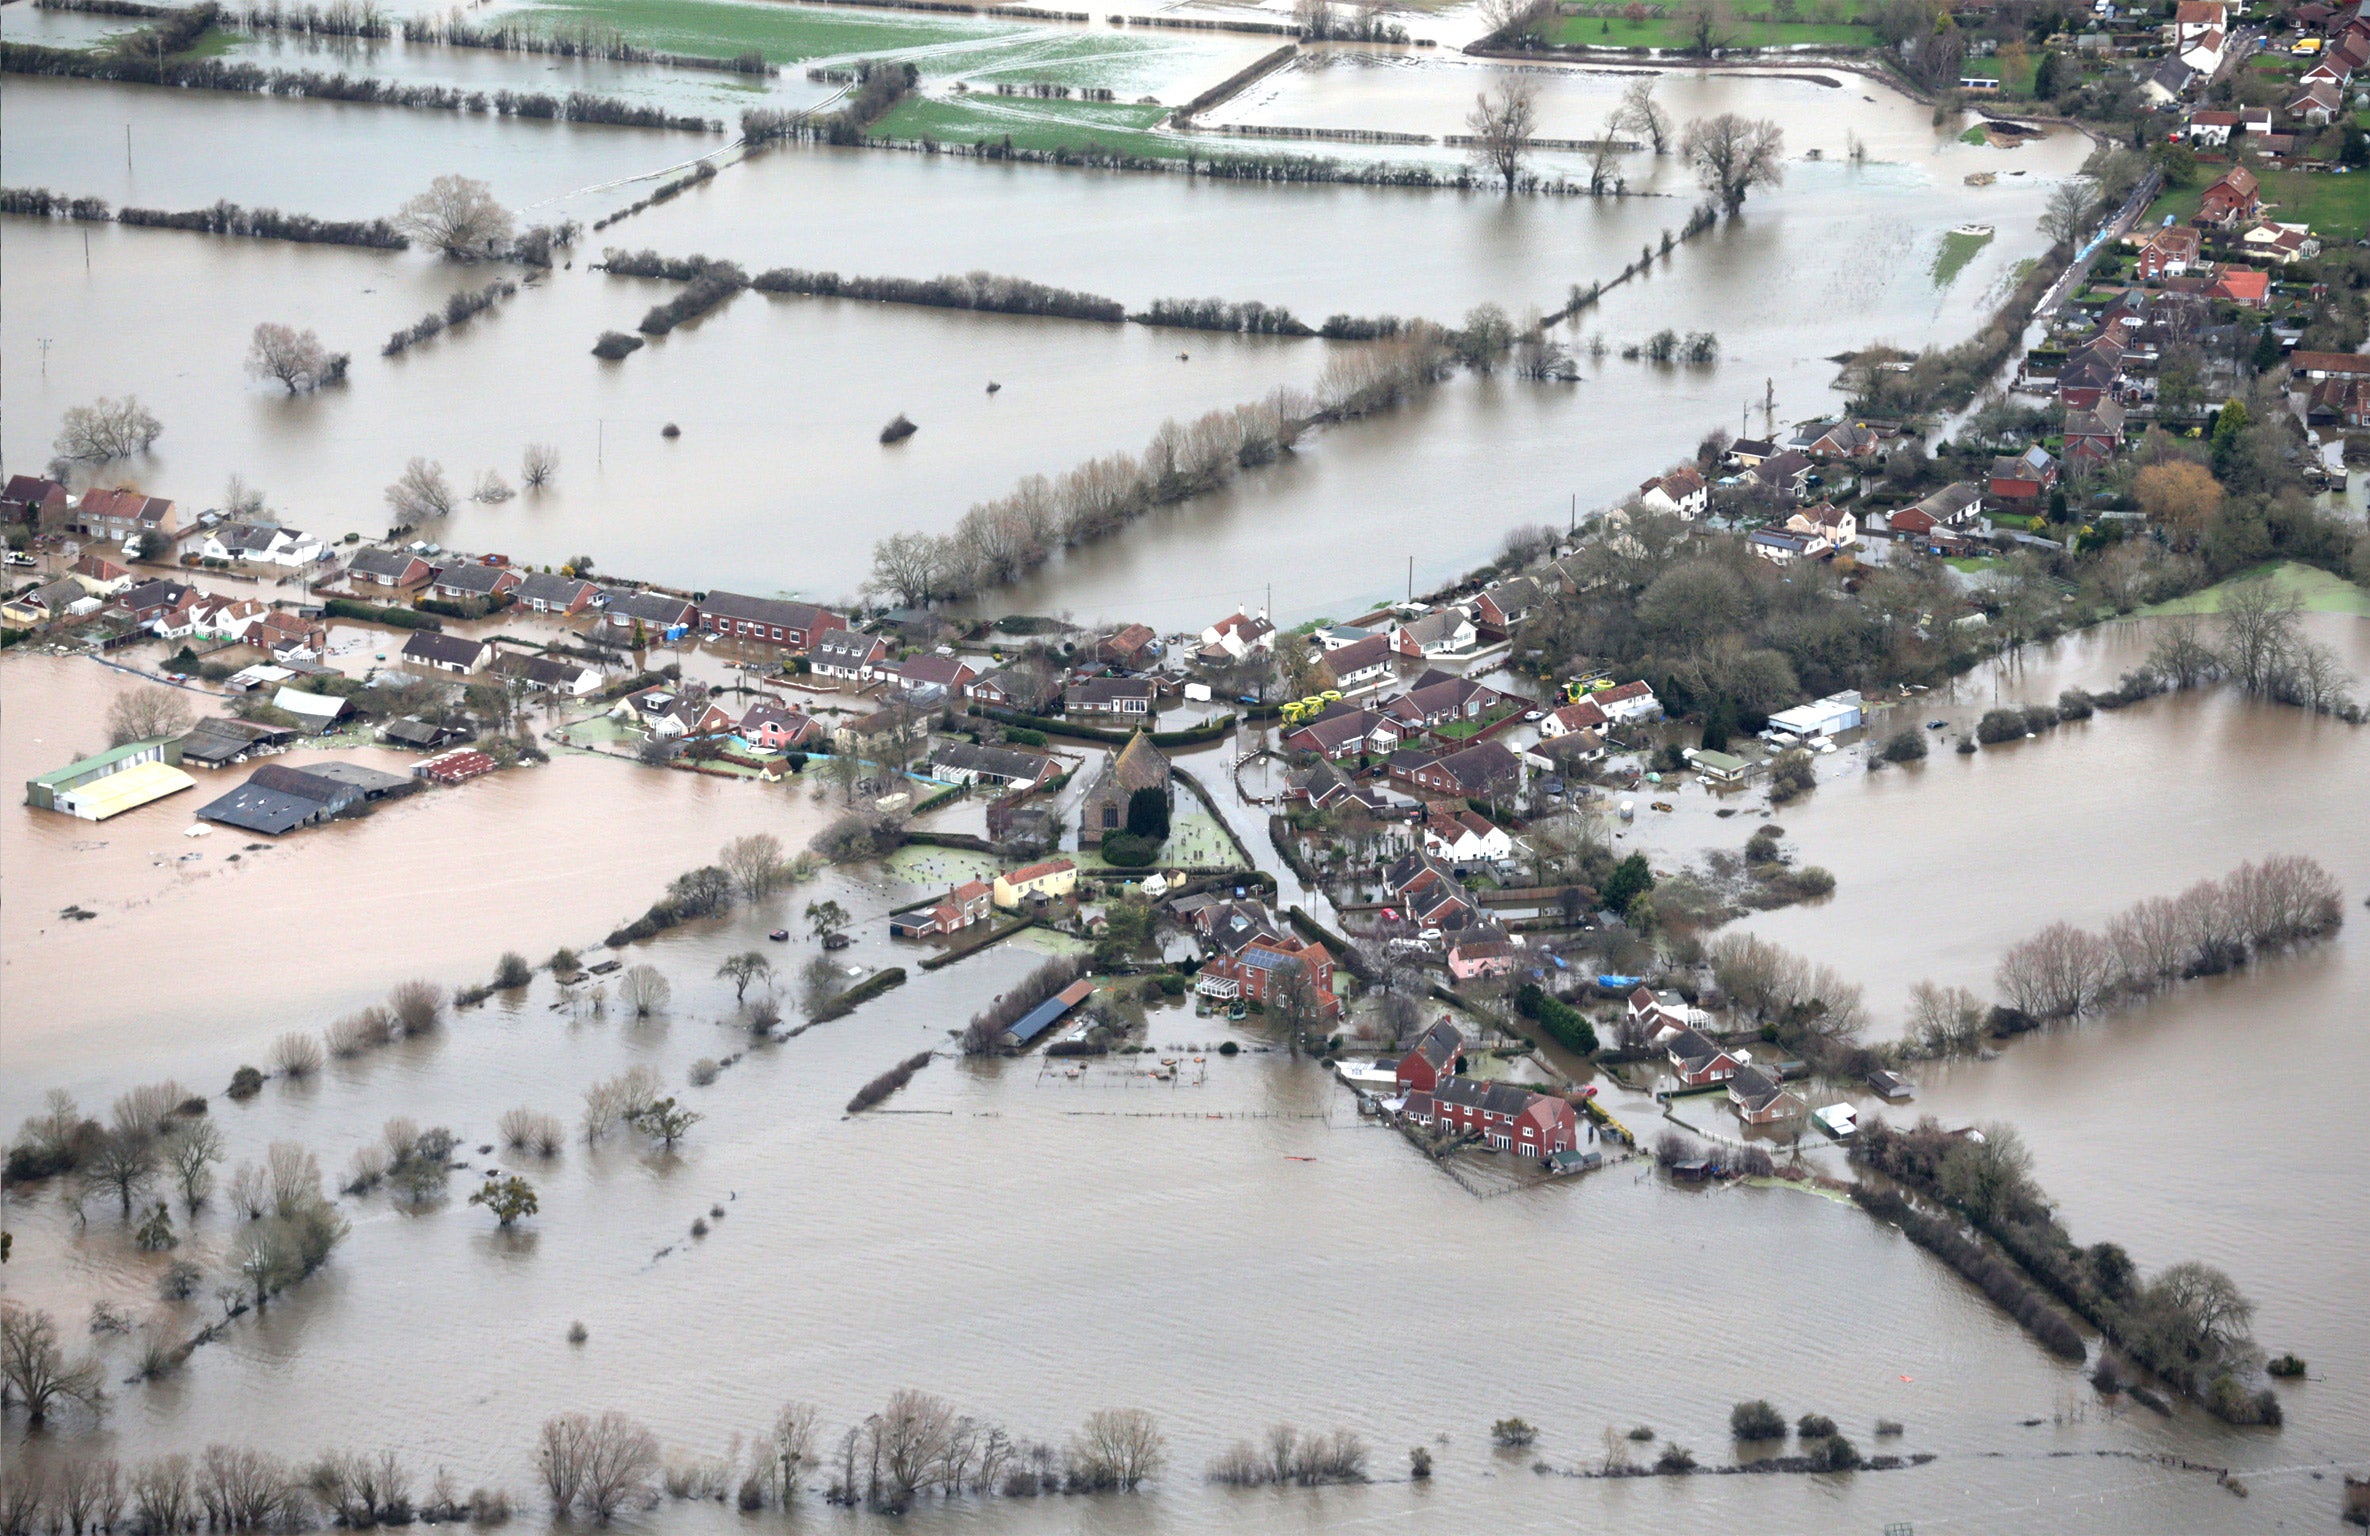 Water surrounds flooded propeties in the village of Moorland on the Somerset Levels near Bridgwater (Getty)